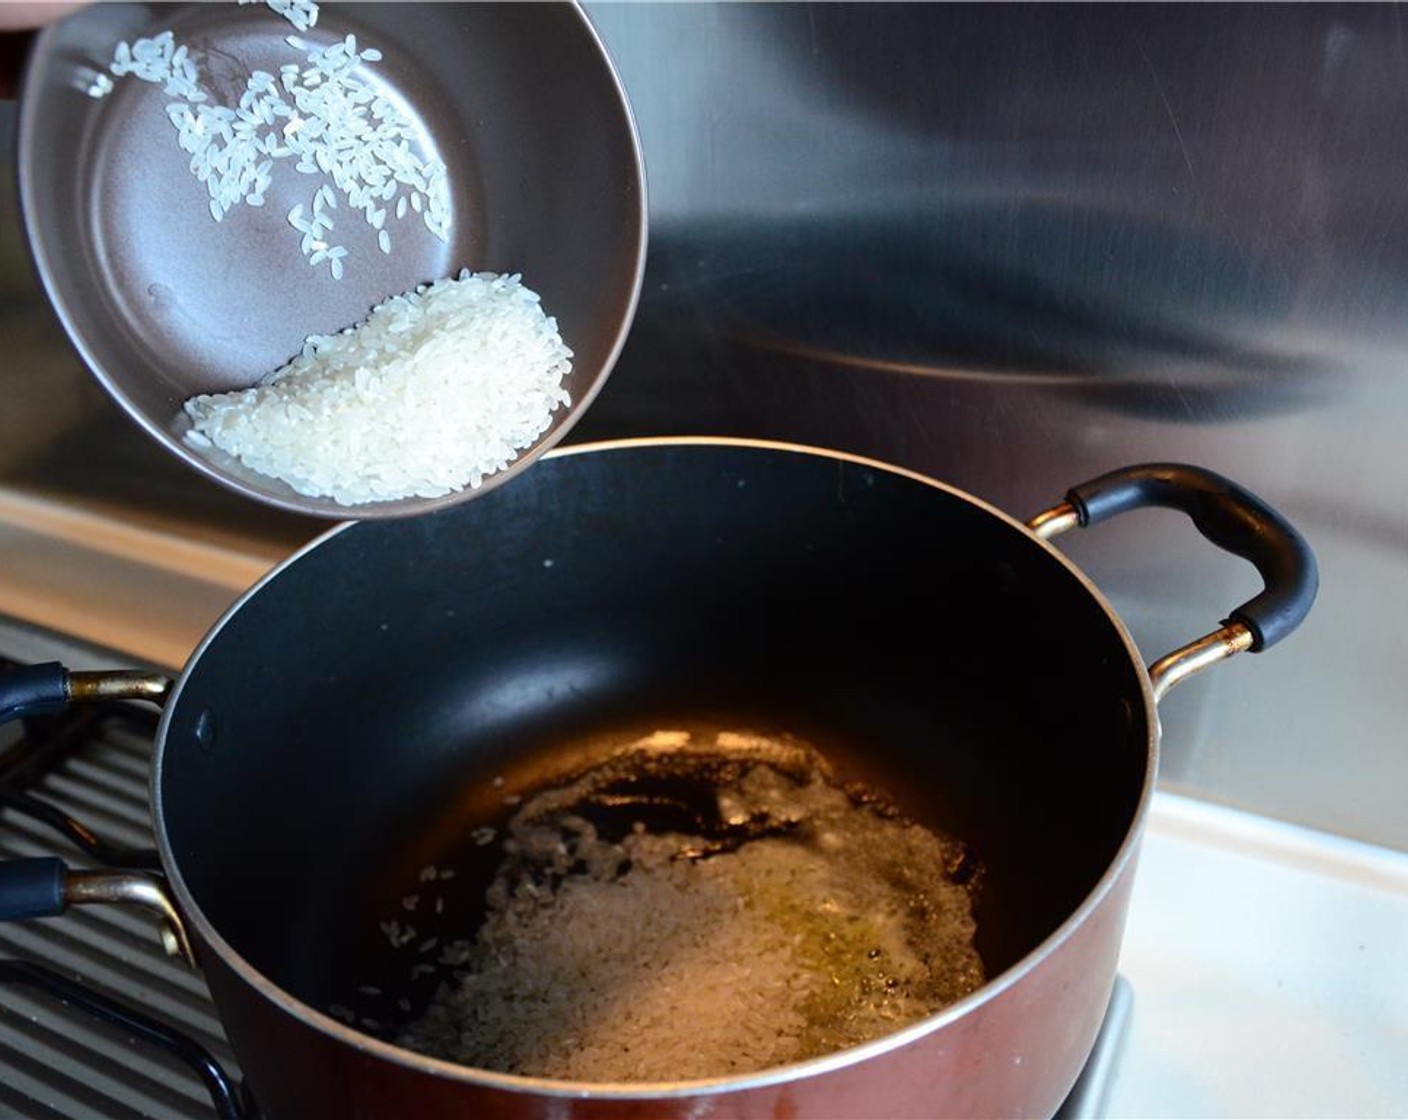 step 1 Melt the Unsalted Butter (1 Tbsp) in a large pot and sauté the Short Grain White Rice (1/2 cup) for a minute.